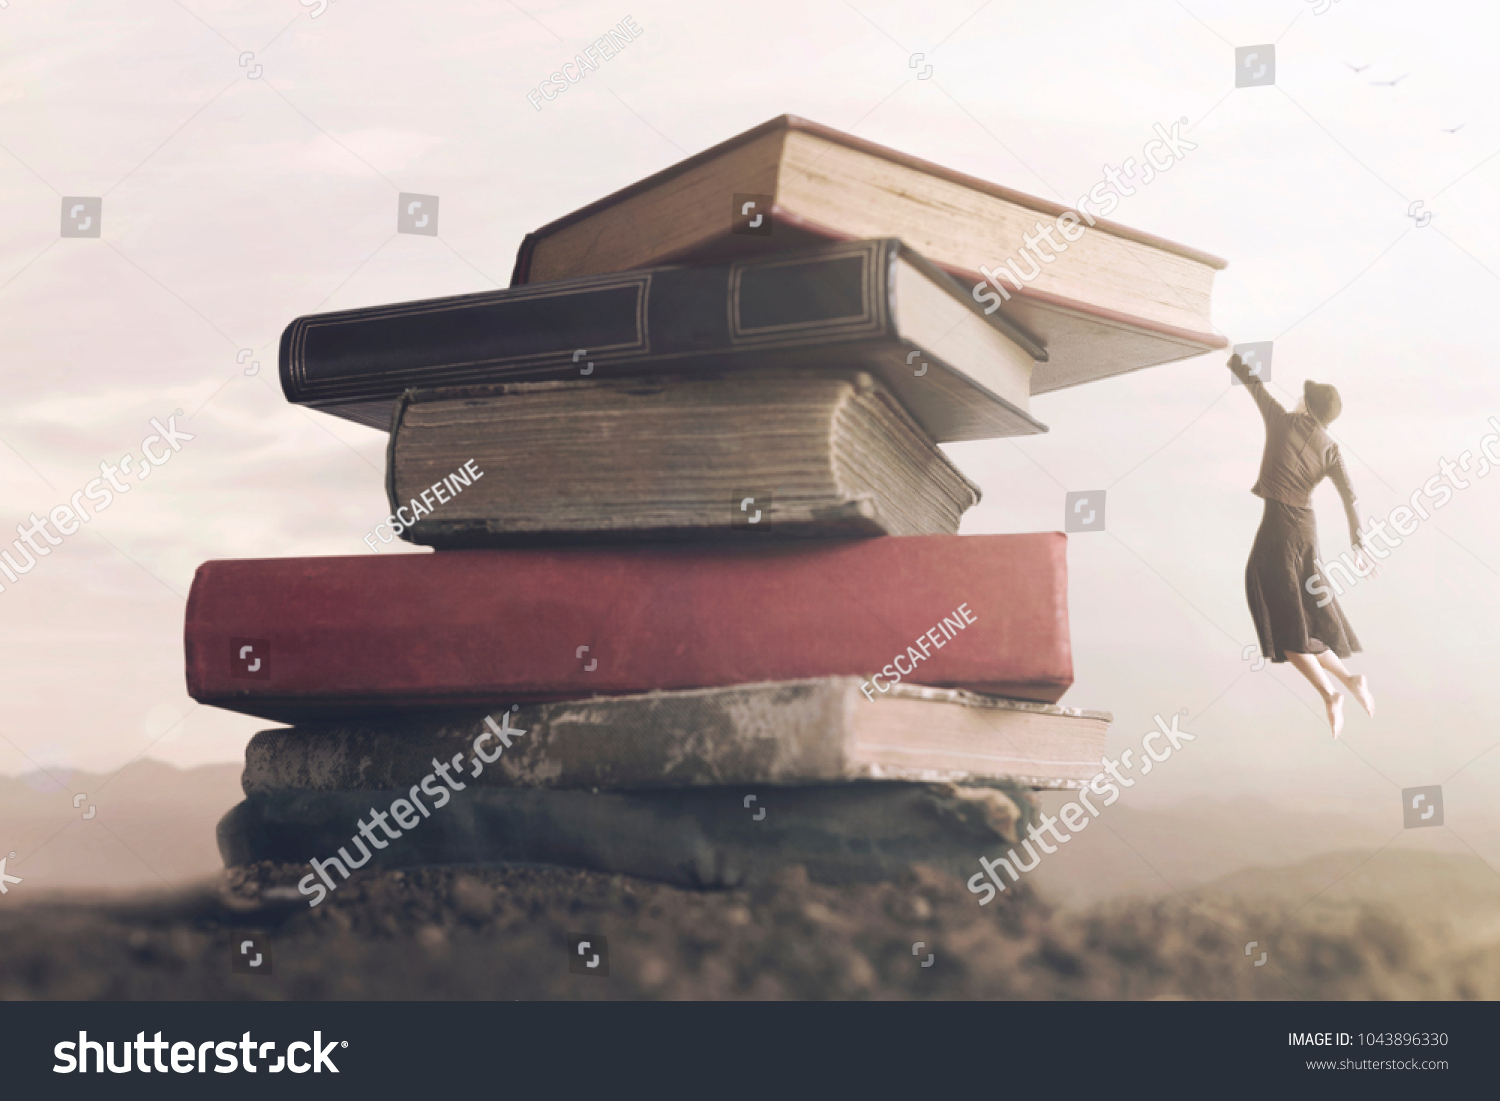 conceptual image a brave woman climbing a pile of books to reach the top #1043896330